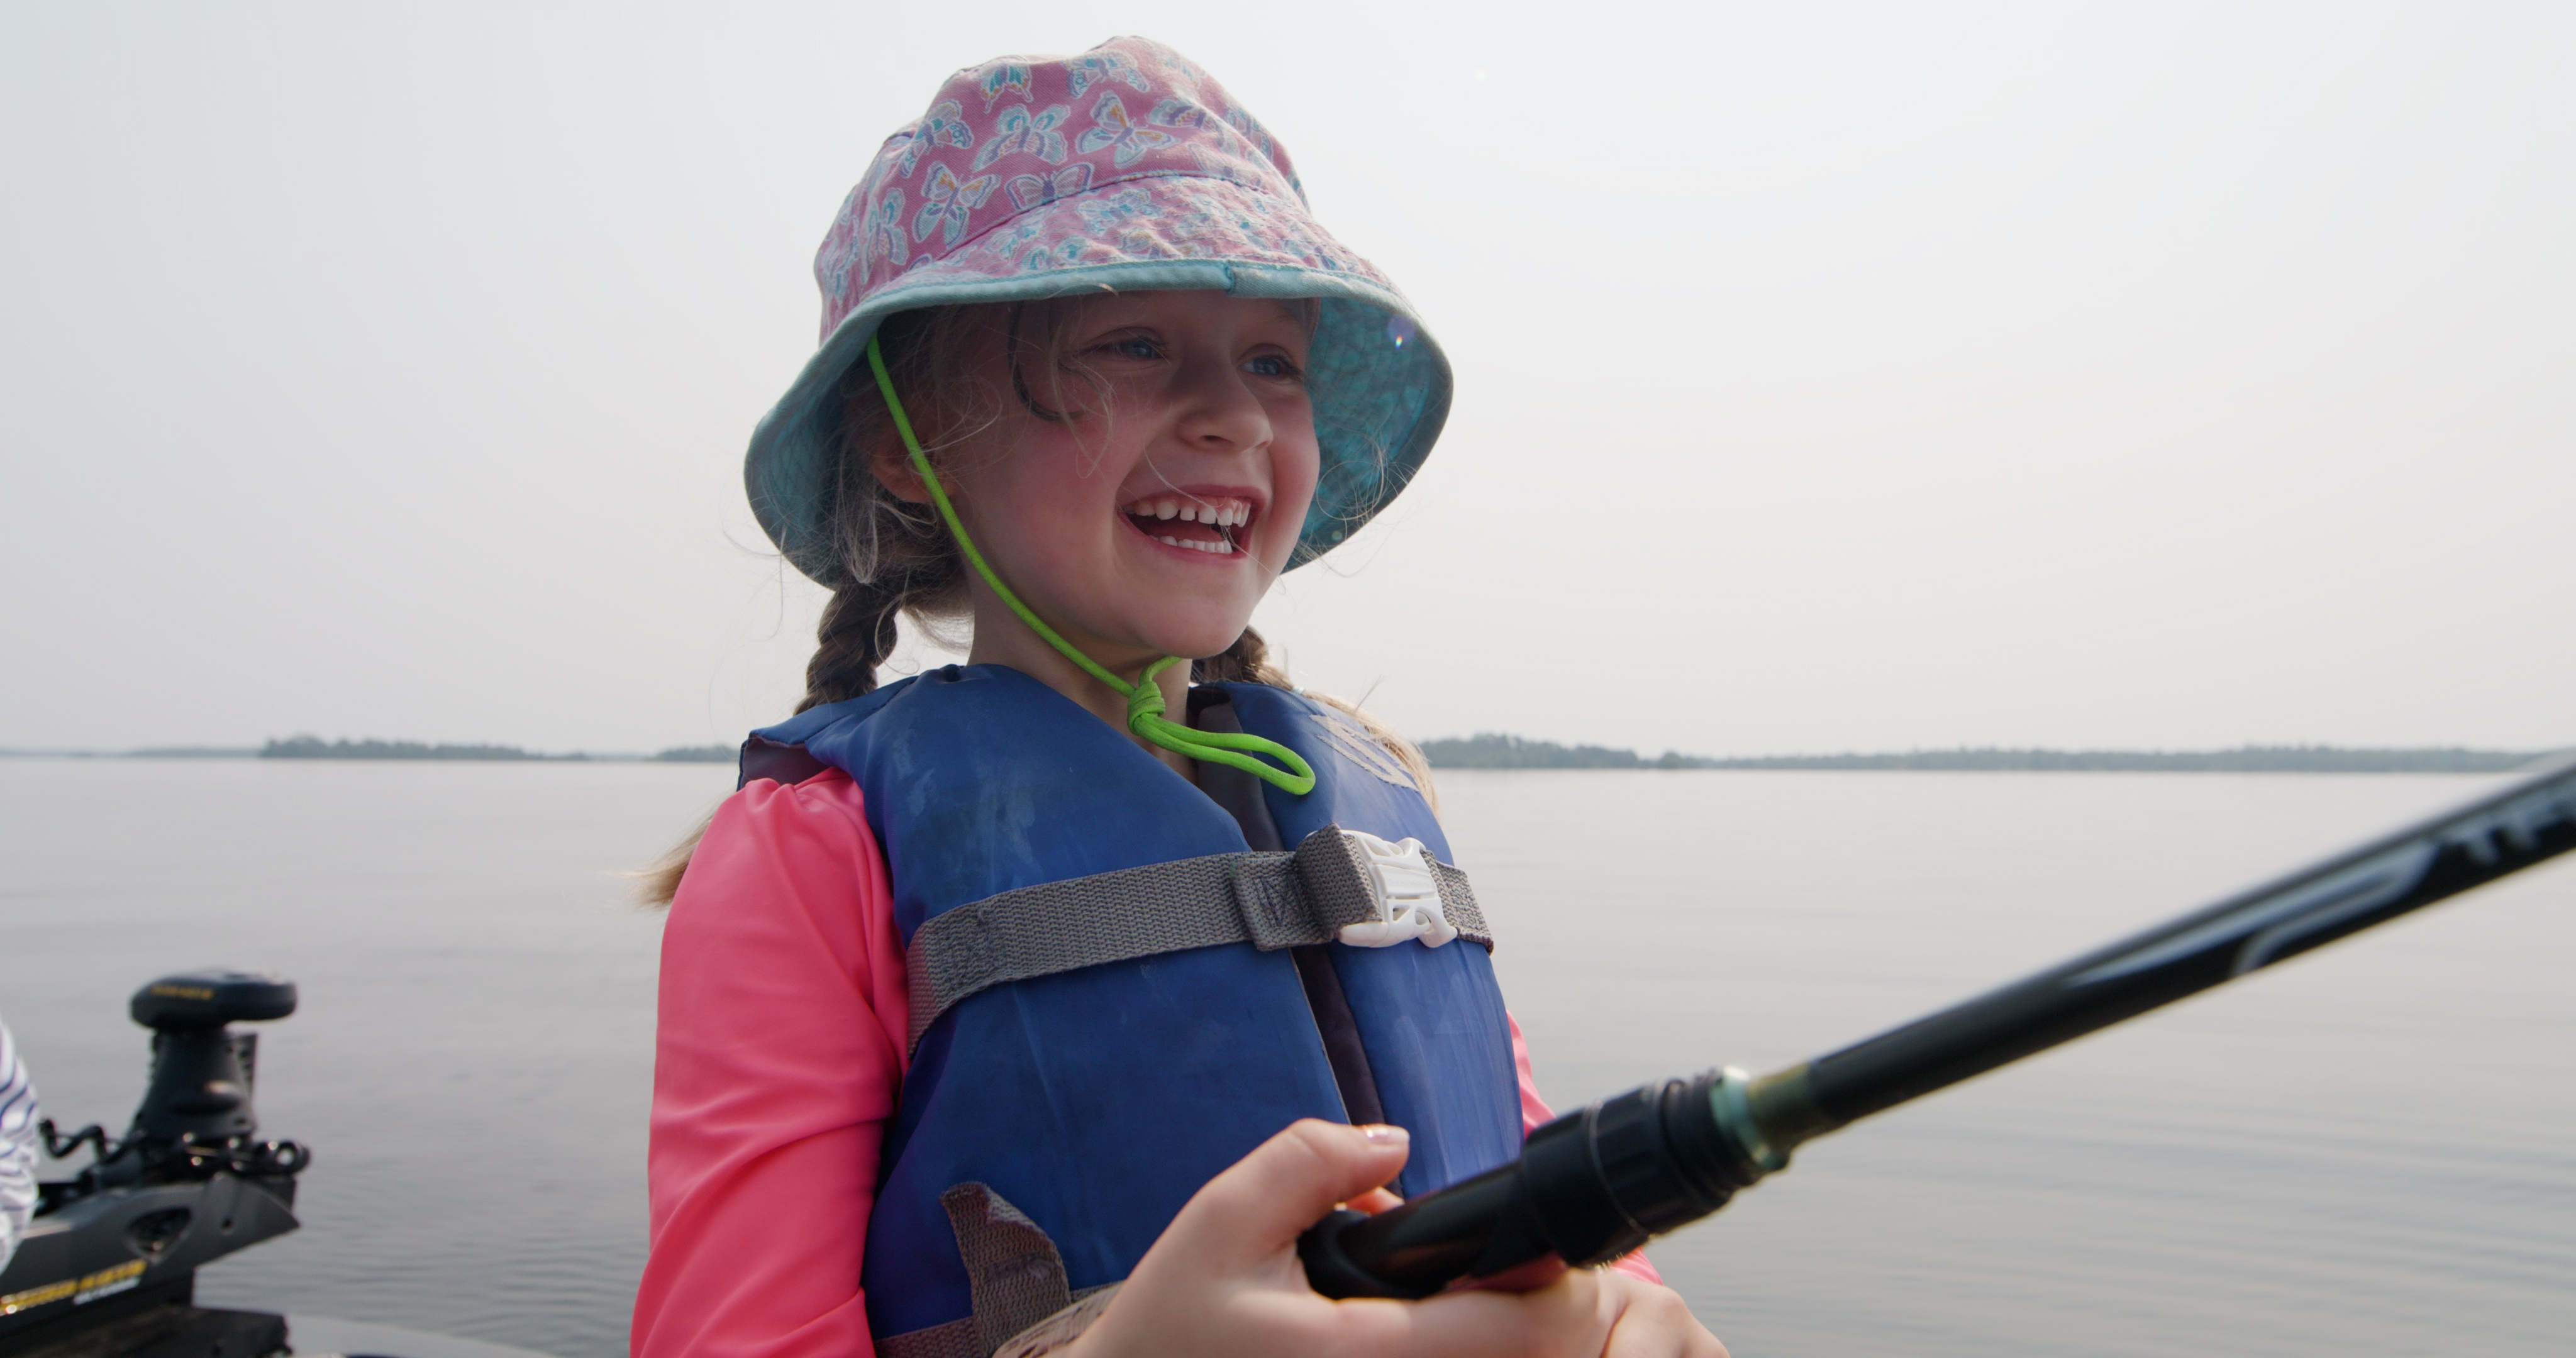 A small child wearing a life vest on a boat and fishing